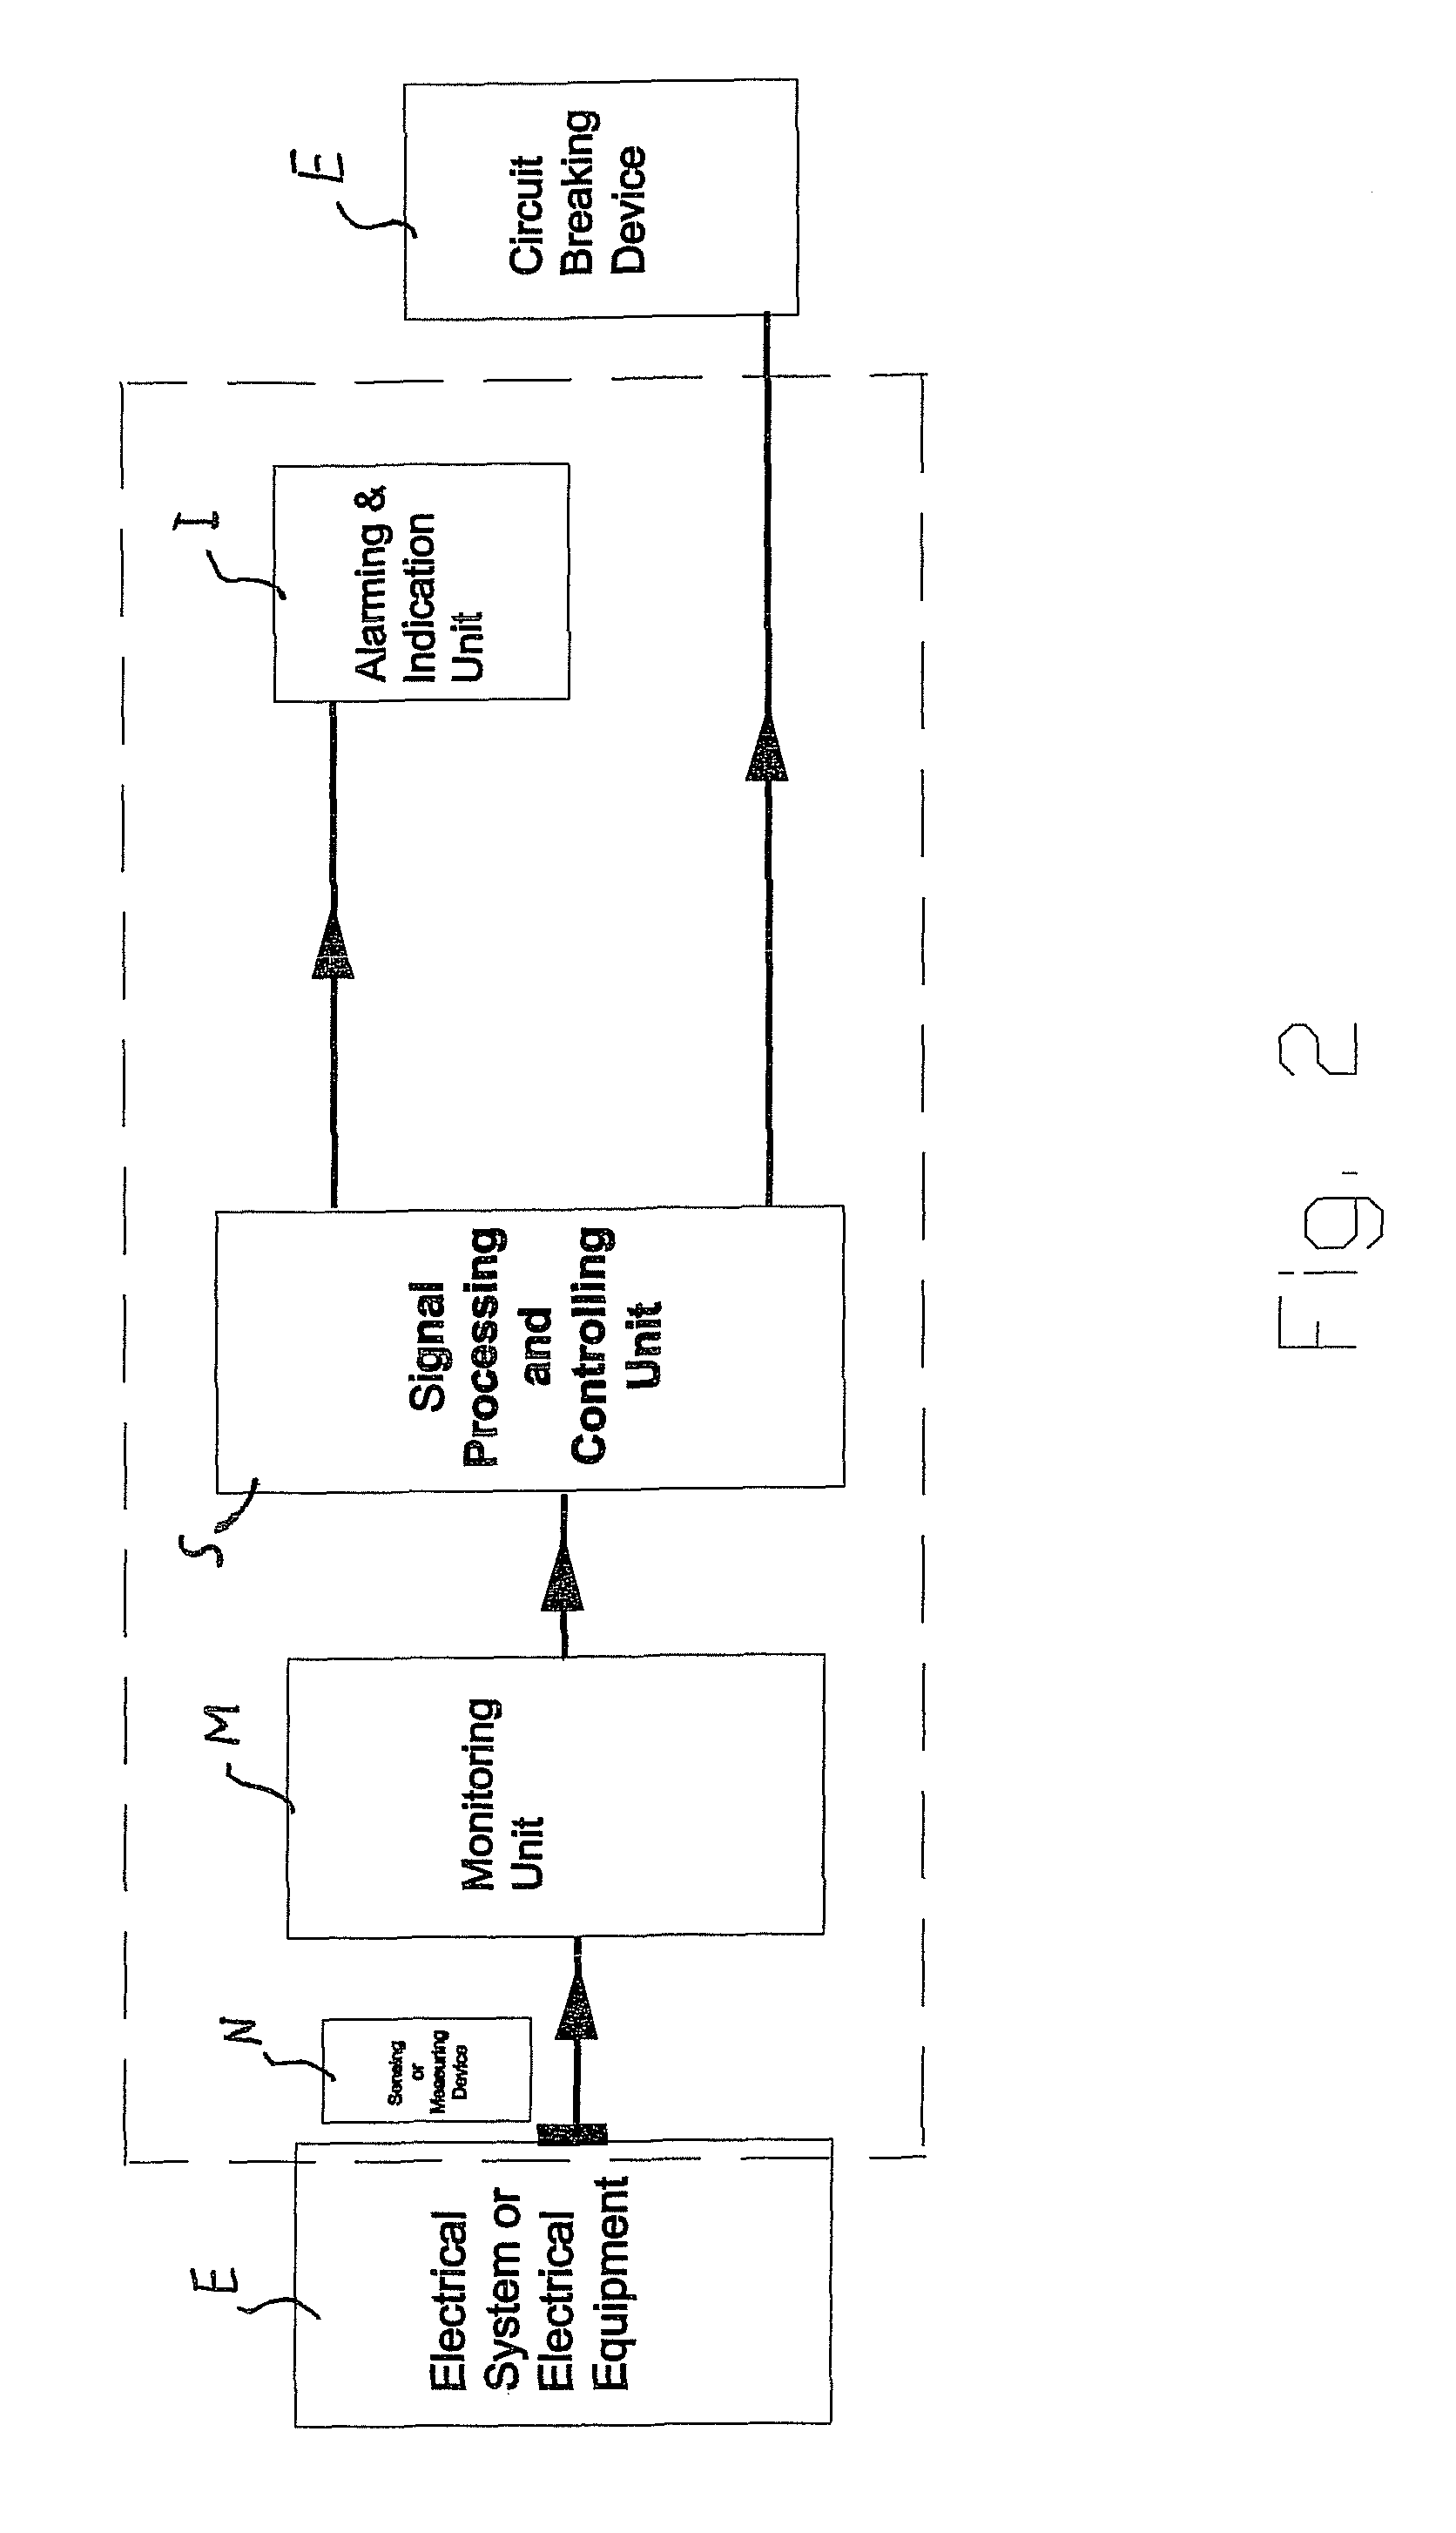 Electrical fault restricting system